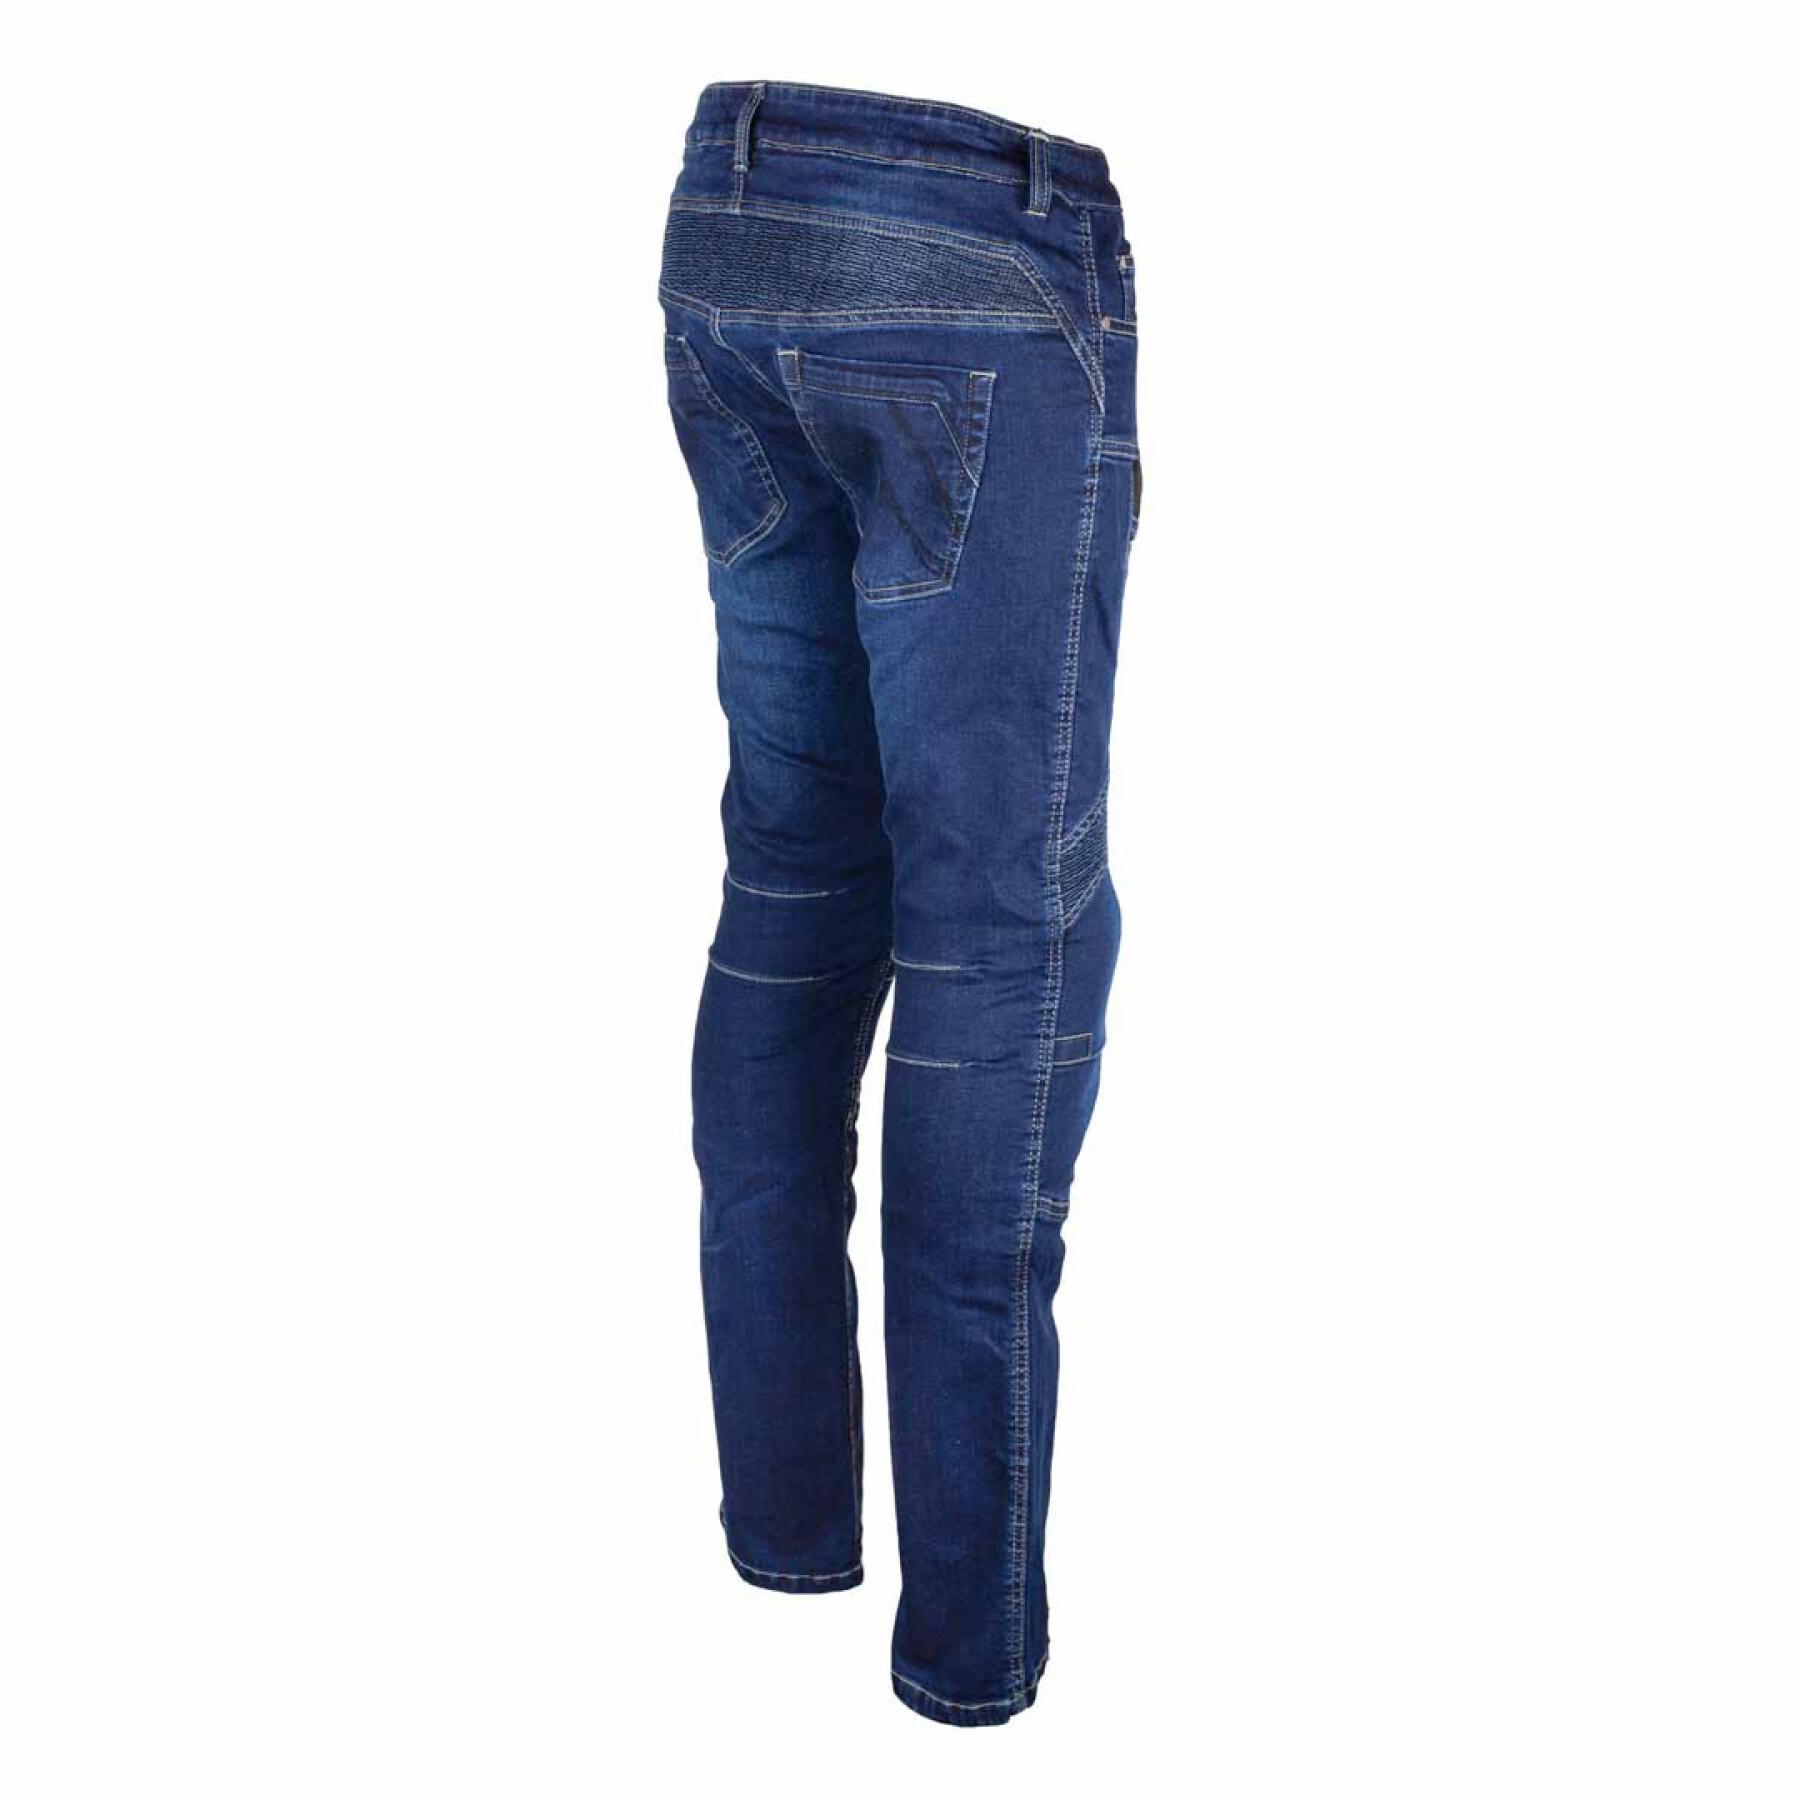 Motorcycle jeans GMS viper